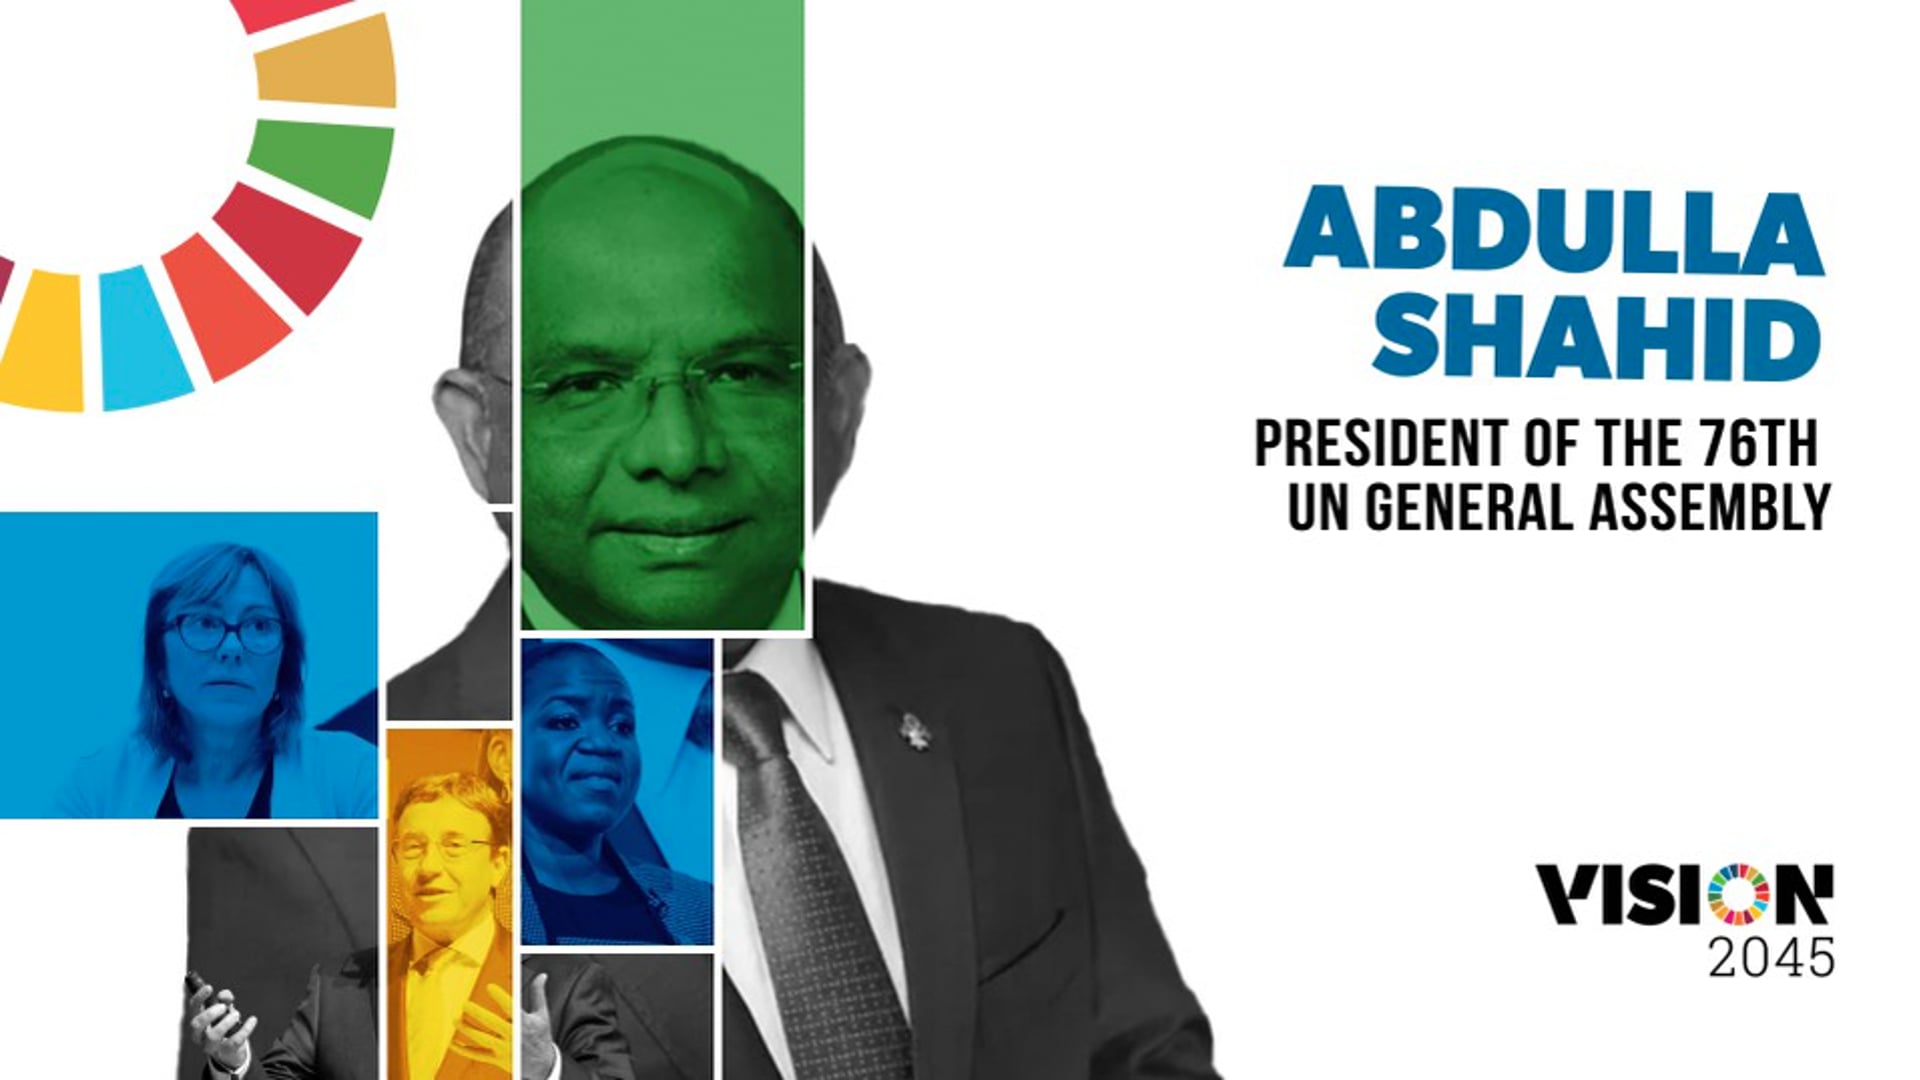 VISION 2045: UN SPEAKER - ABDULLA SHAHID - PRESIDENT OF THE 76TH UN GENERAL ASSEMBLY